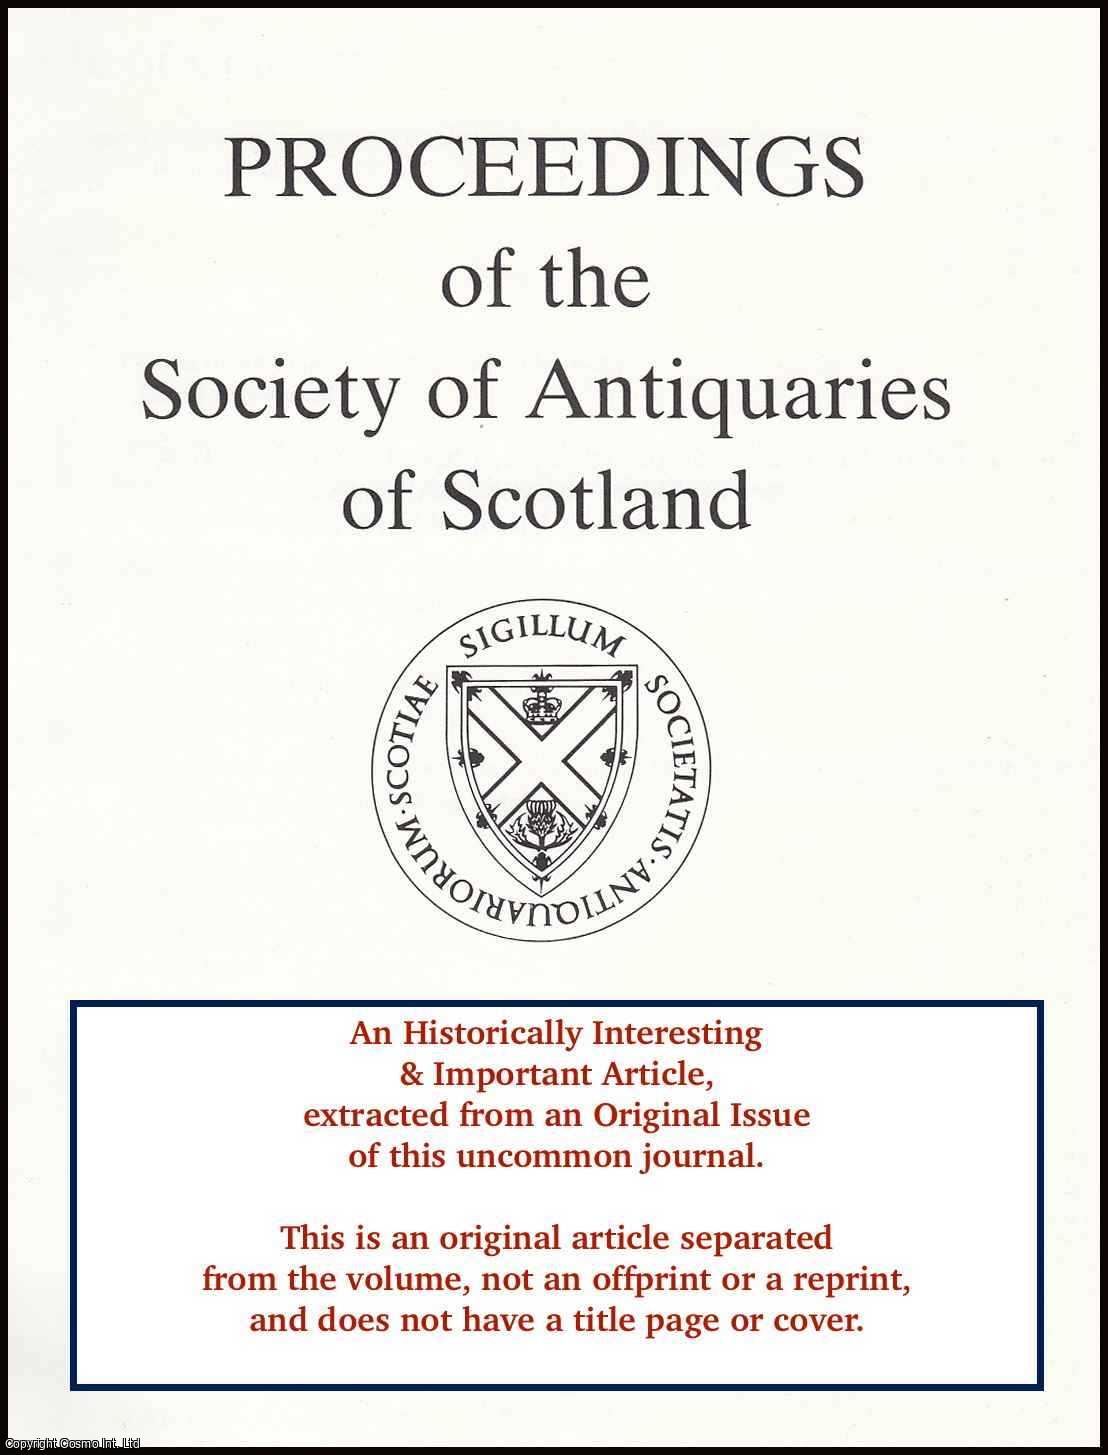 Richard Tipping & Eileen Tisdall - The Landscape Context of The Antonine Wall: A Review of The Literature. An original article from the Proceedings of the Society of Antiquaries of Scotland, 2005.